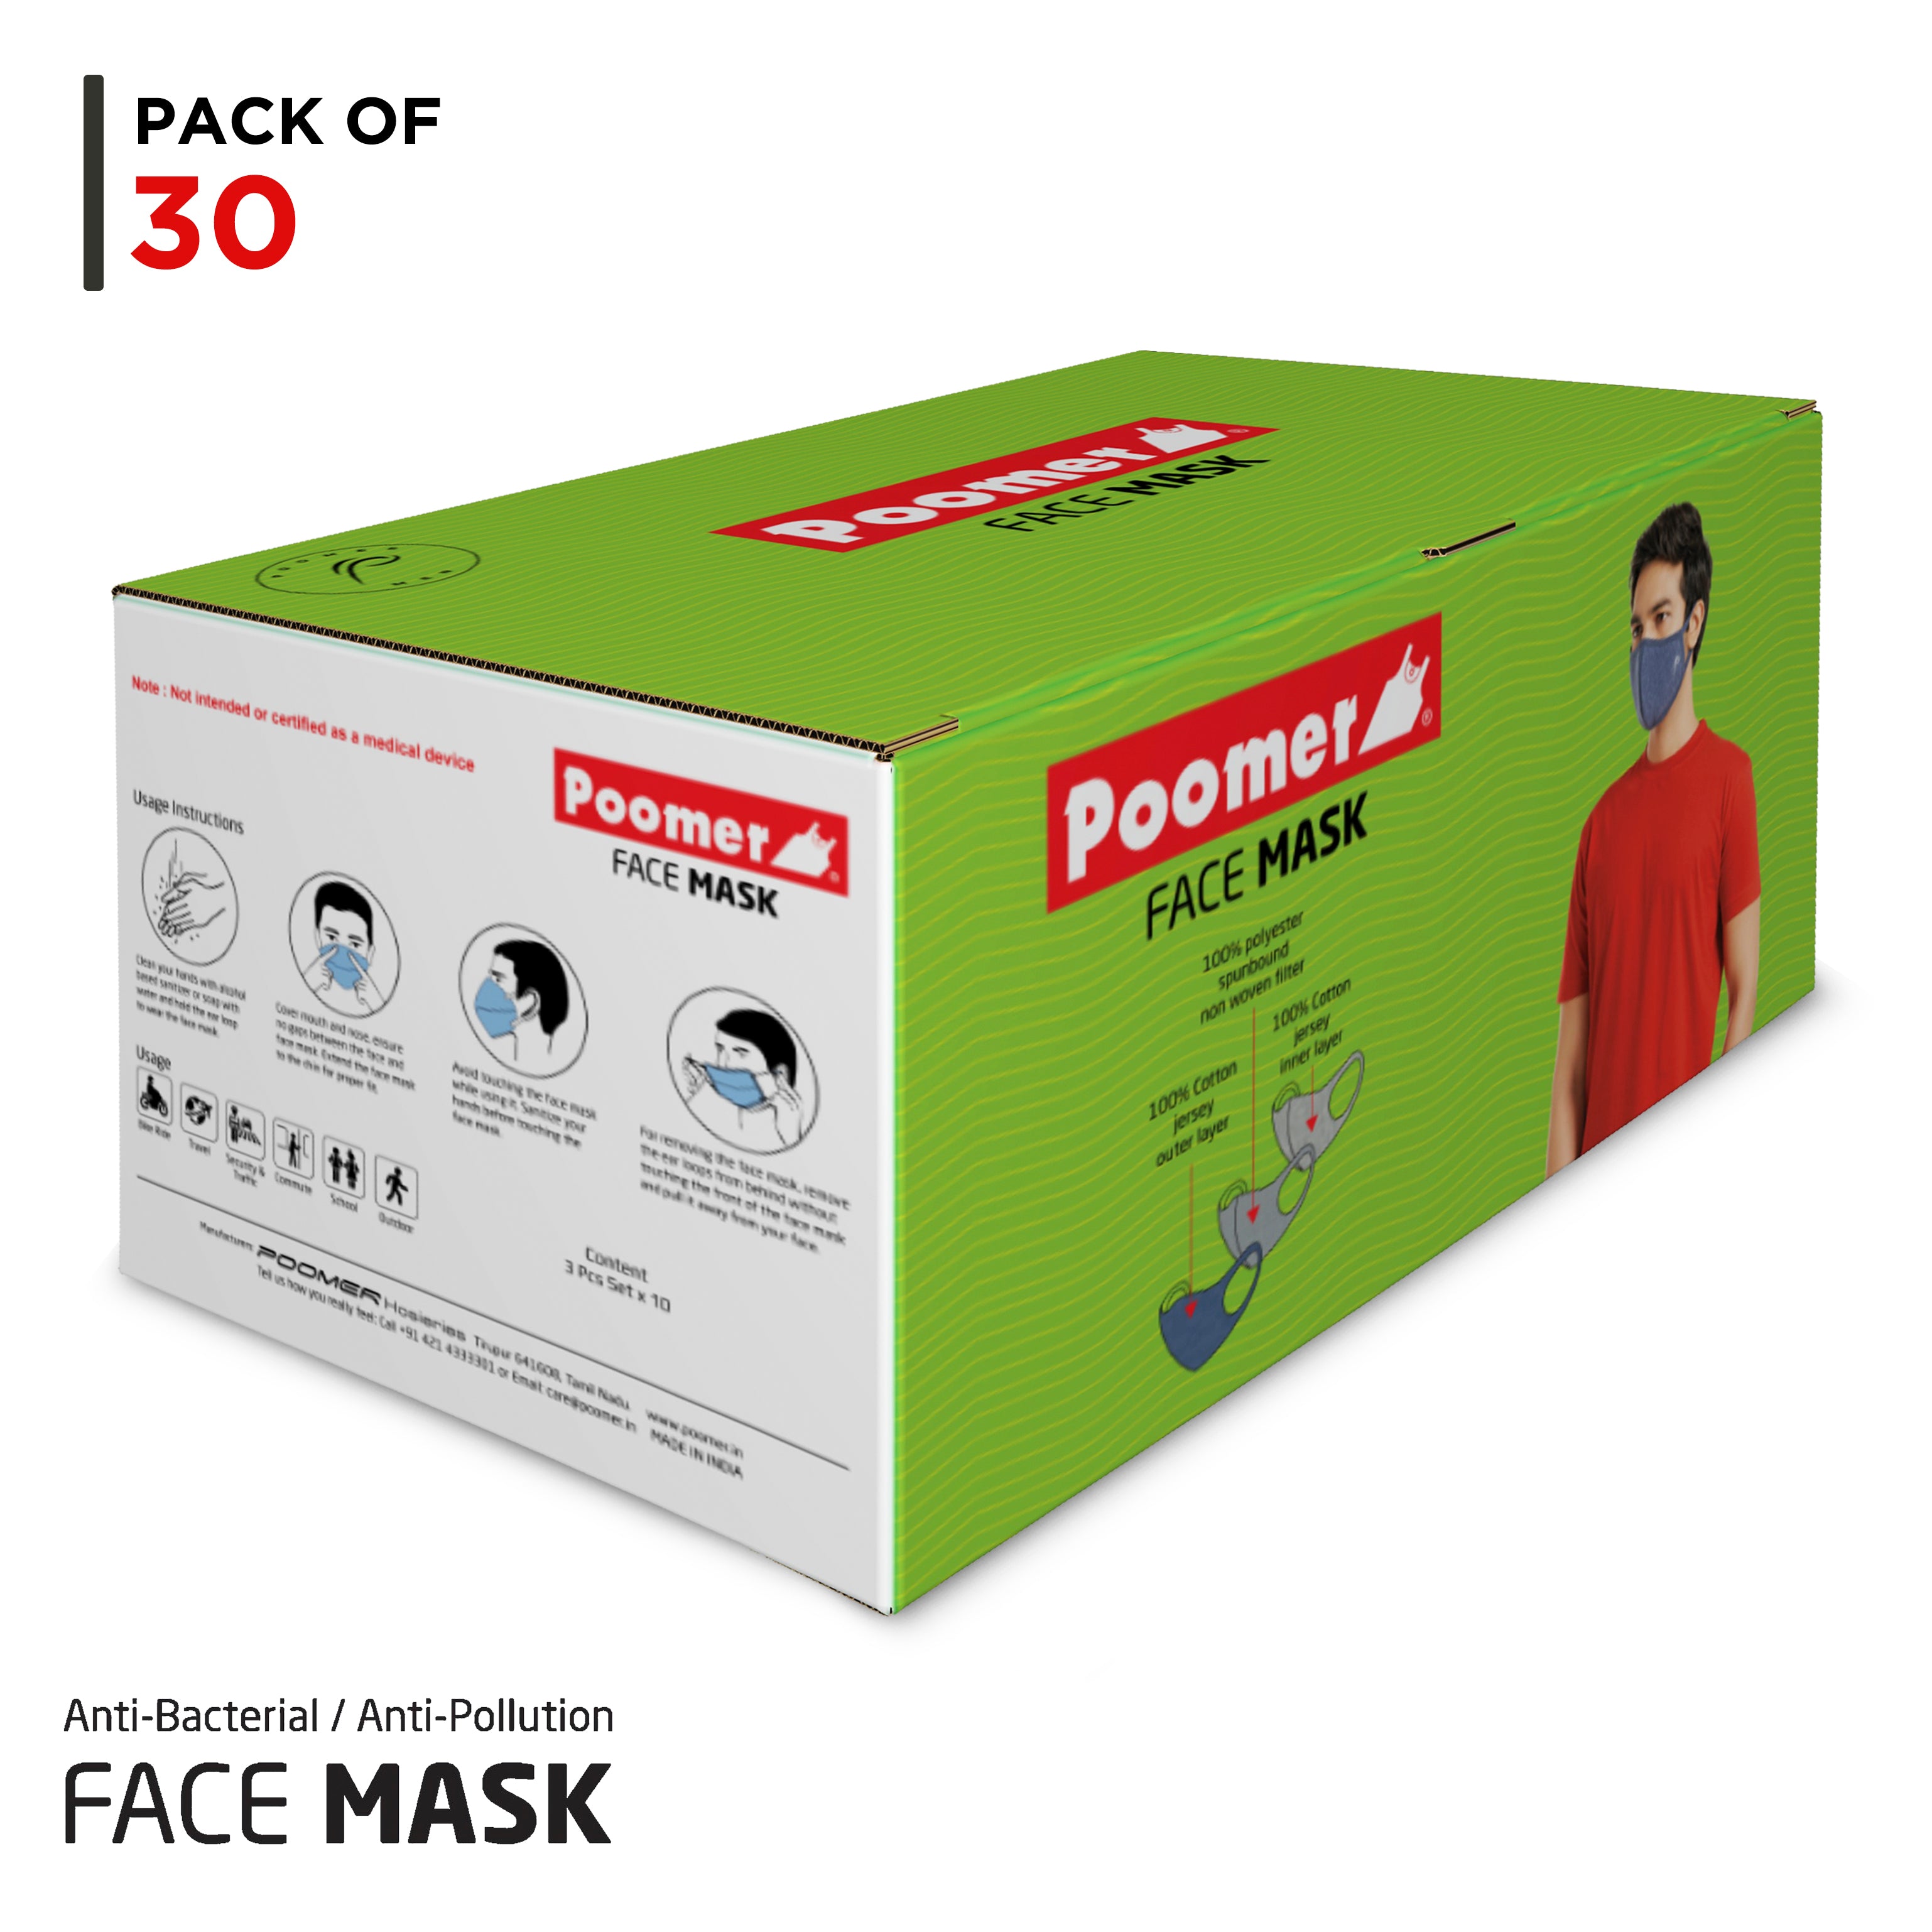 Poomer Face Mask BOX - 3 Layer Anti-Bacterial & Anti-Pollution Face Mask (Pack of 30) - Premium / Lite